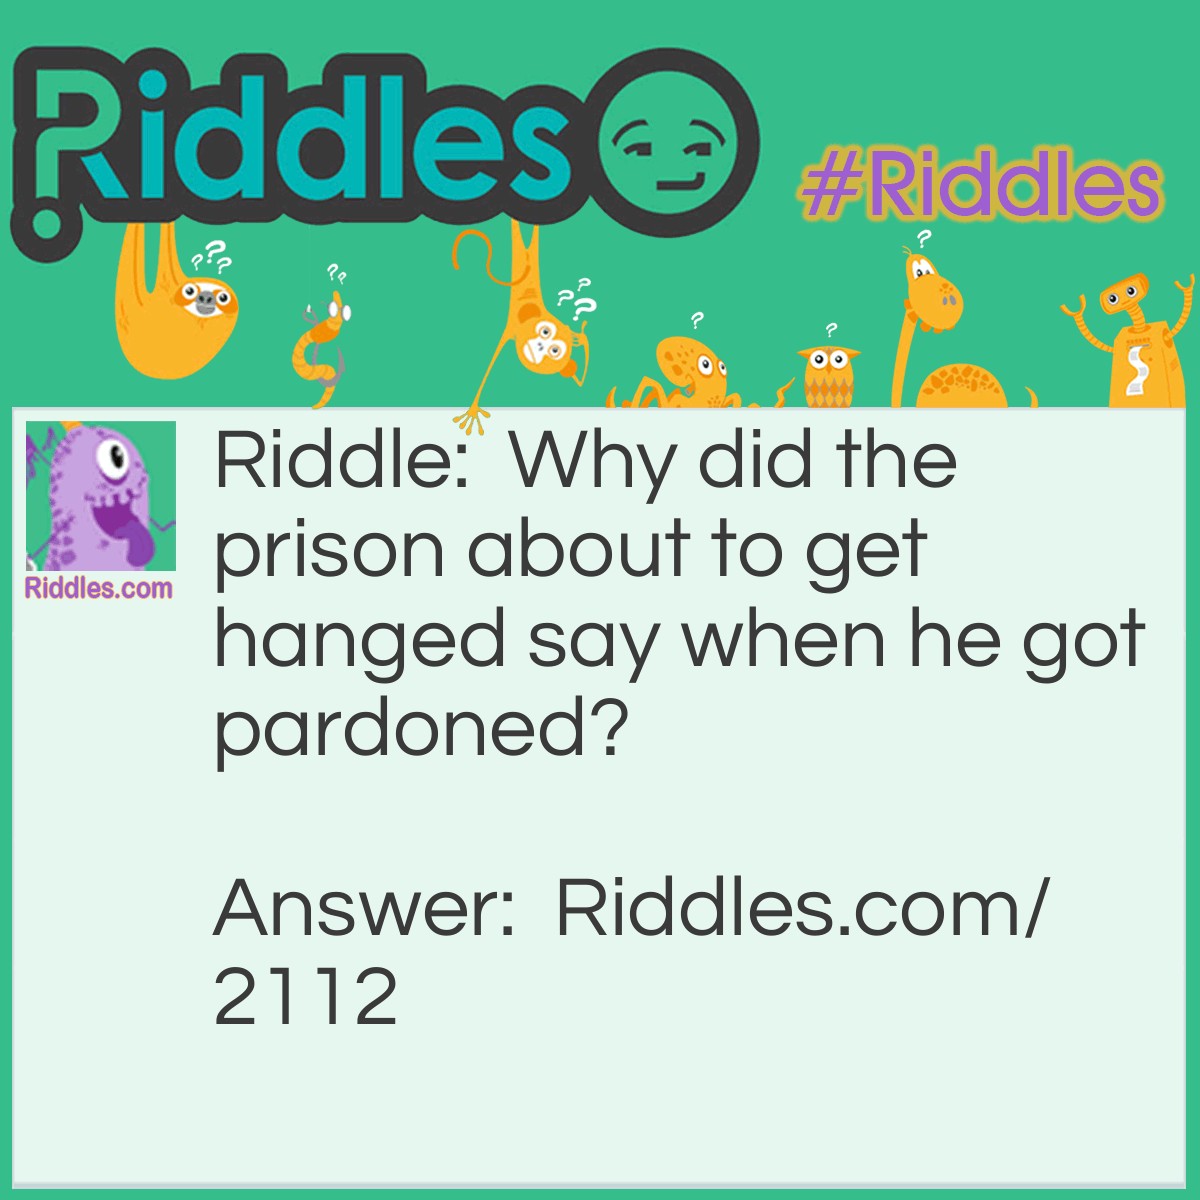 Riddle: Why did the prison about to get hanged say when he got pardoned? Answer: "No noose is good noose."